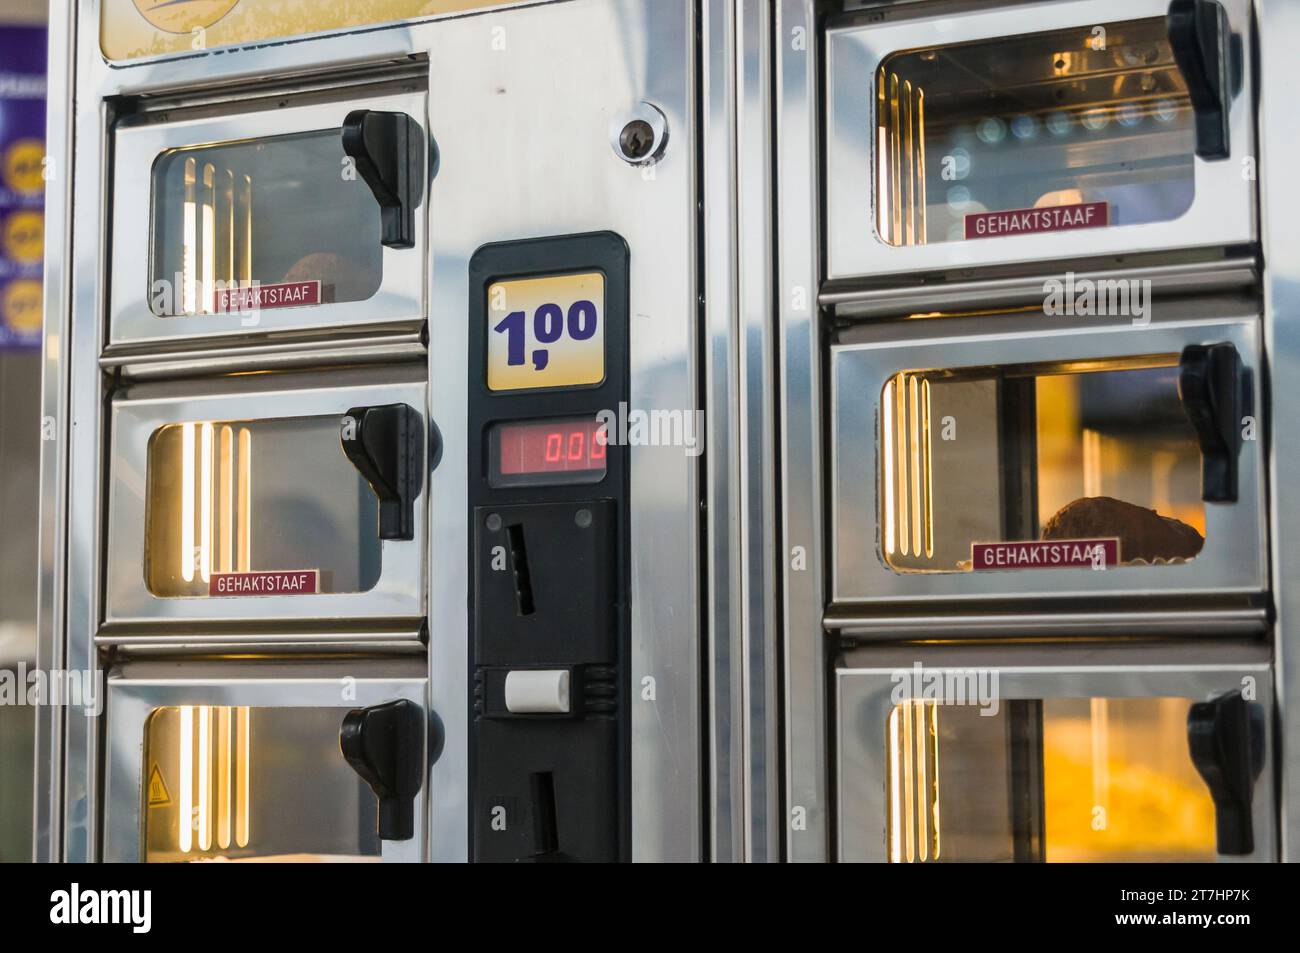 Amsterdam's Automats: Heated Vending Machines Offering Instant Snacks